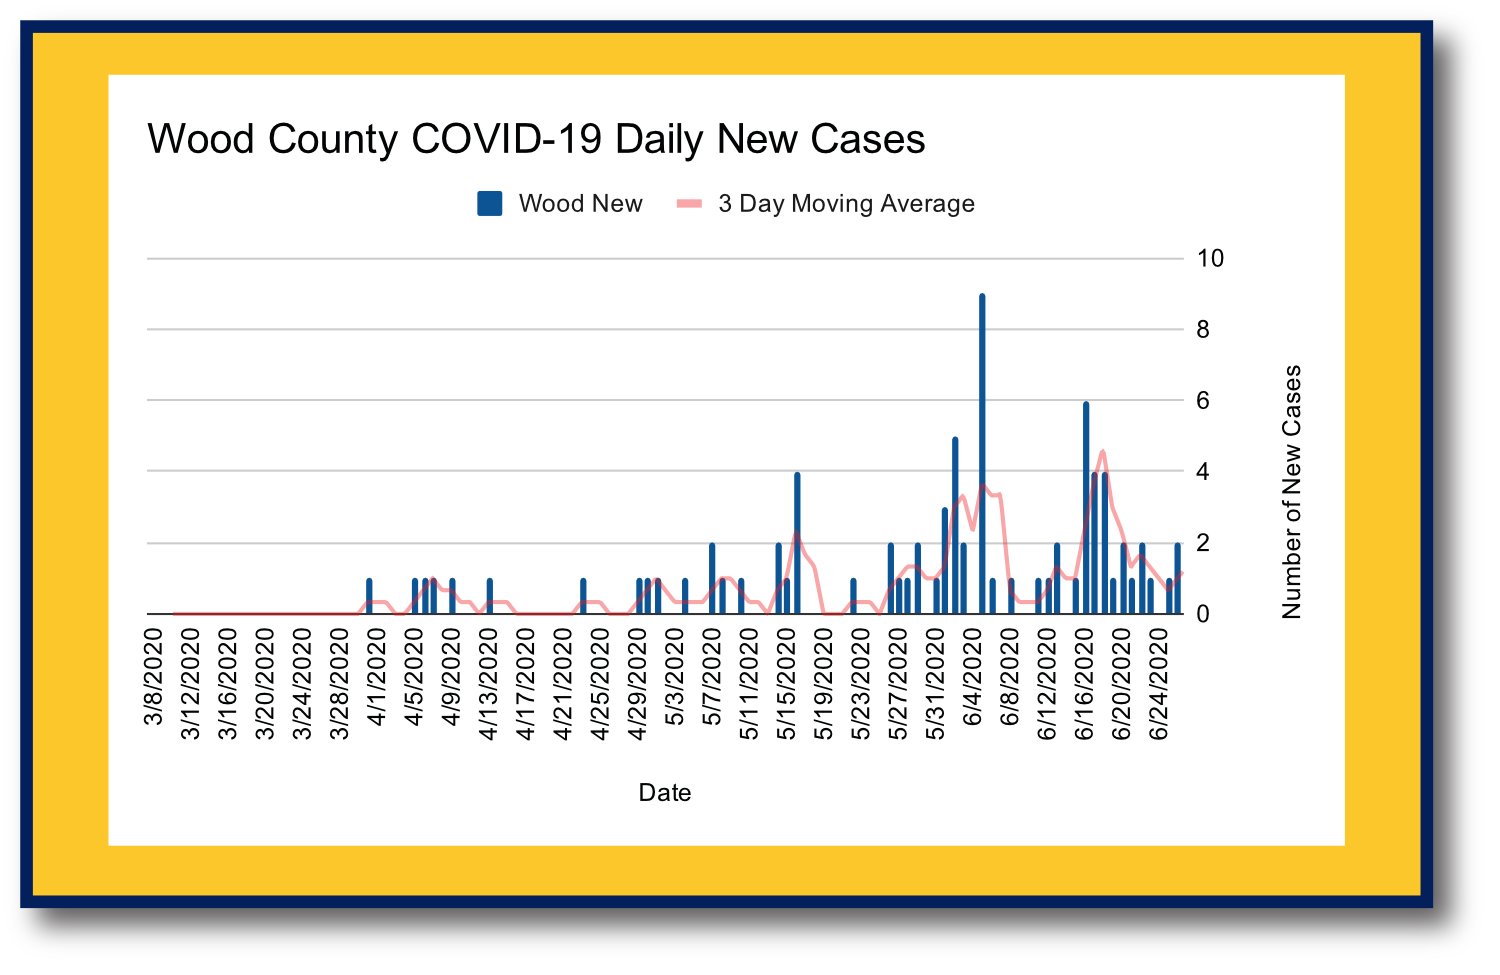 Blue bars indicate new daily cases reported by Northeast Texas Public Health District. Red line shows a 3-day moving average of those cases